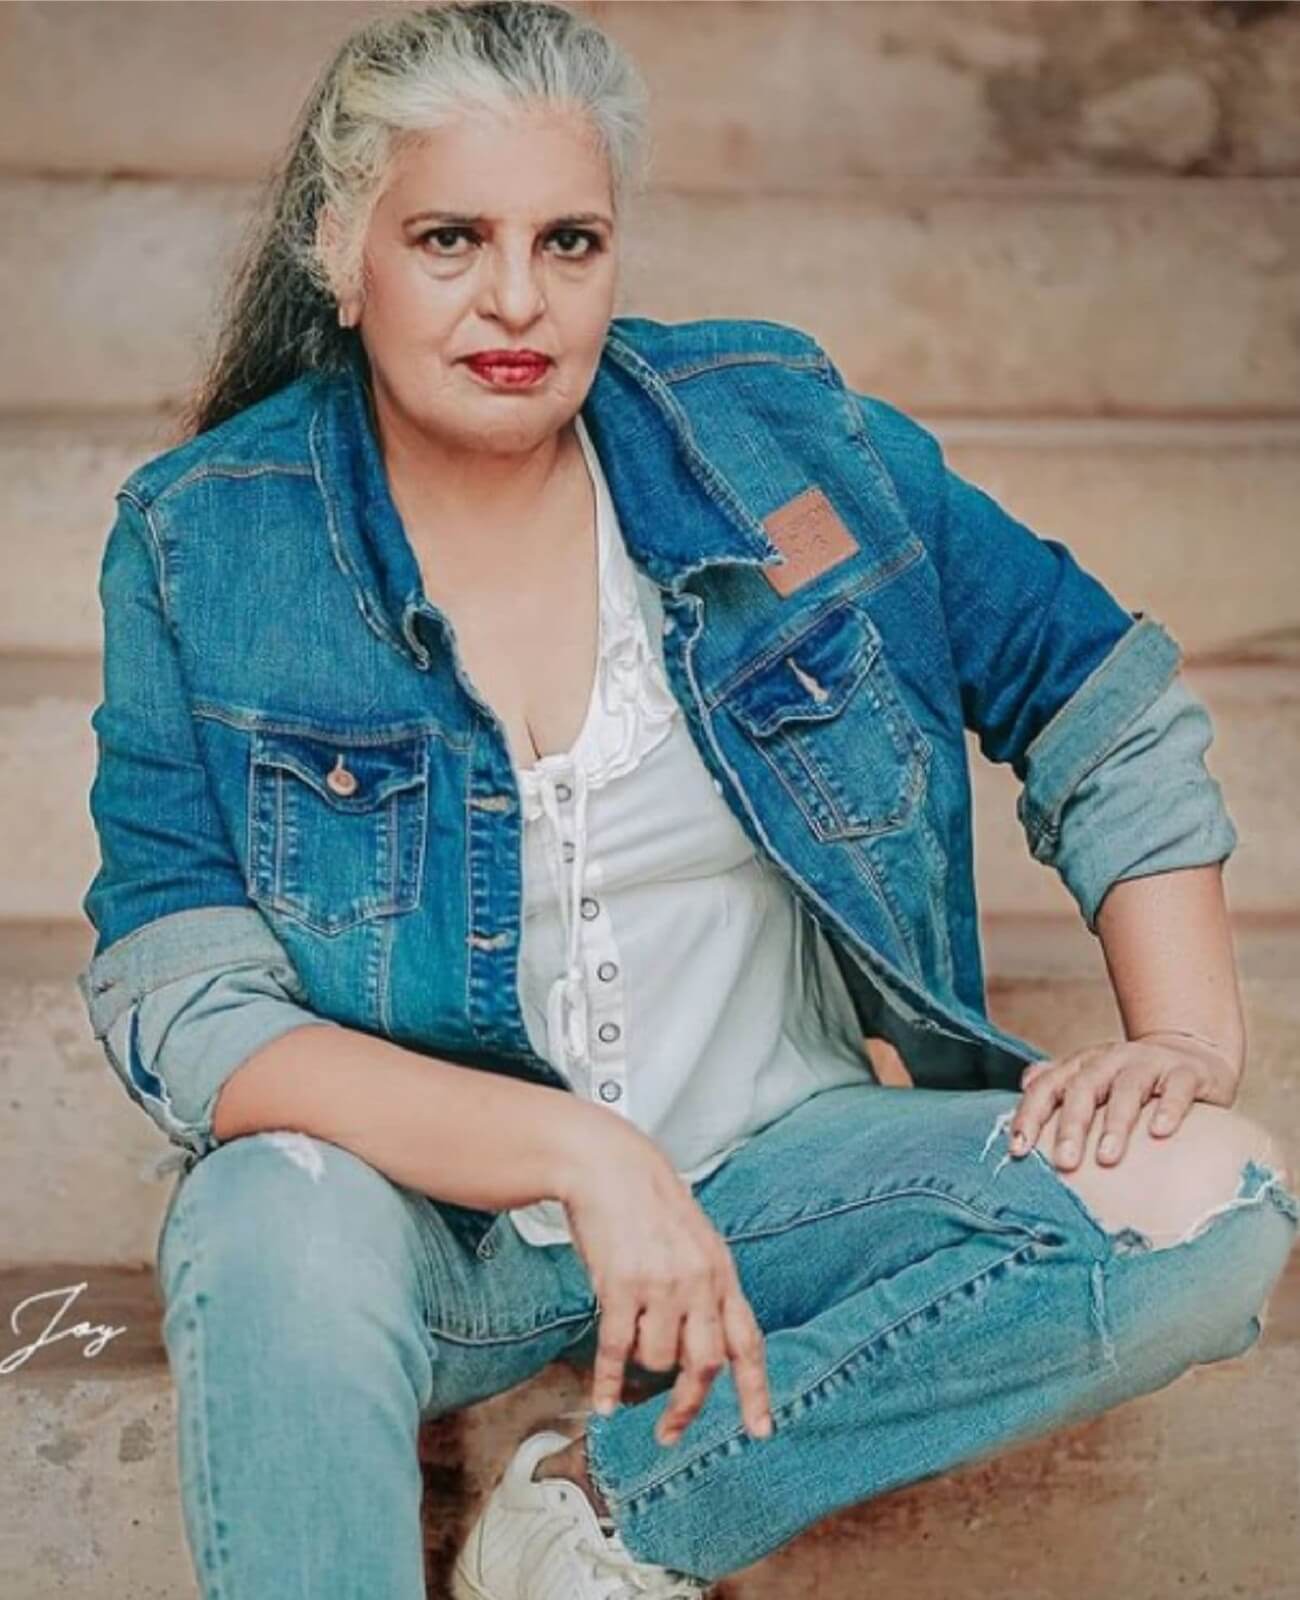 69-year-old actress Rajni photoshoots in Tarn jeans, love with fans, some trolls